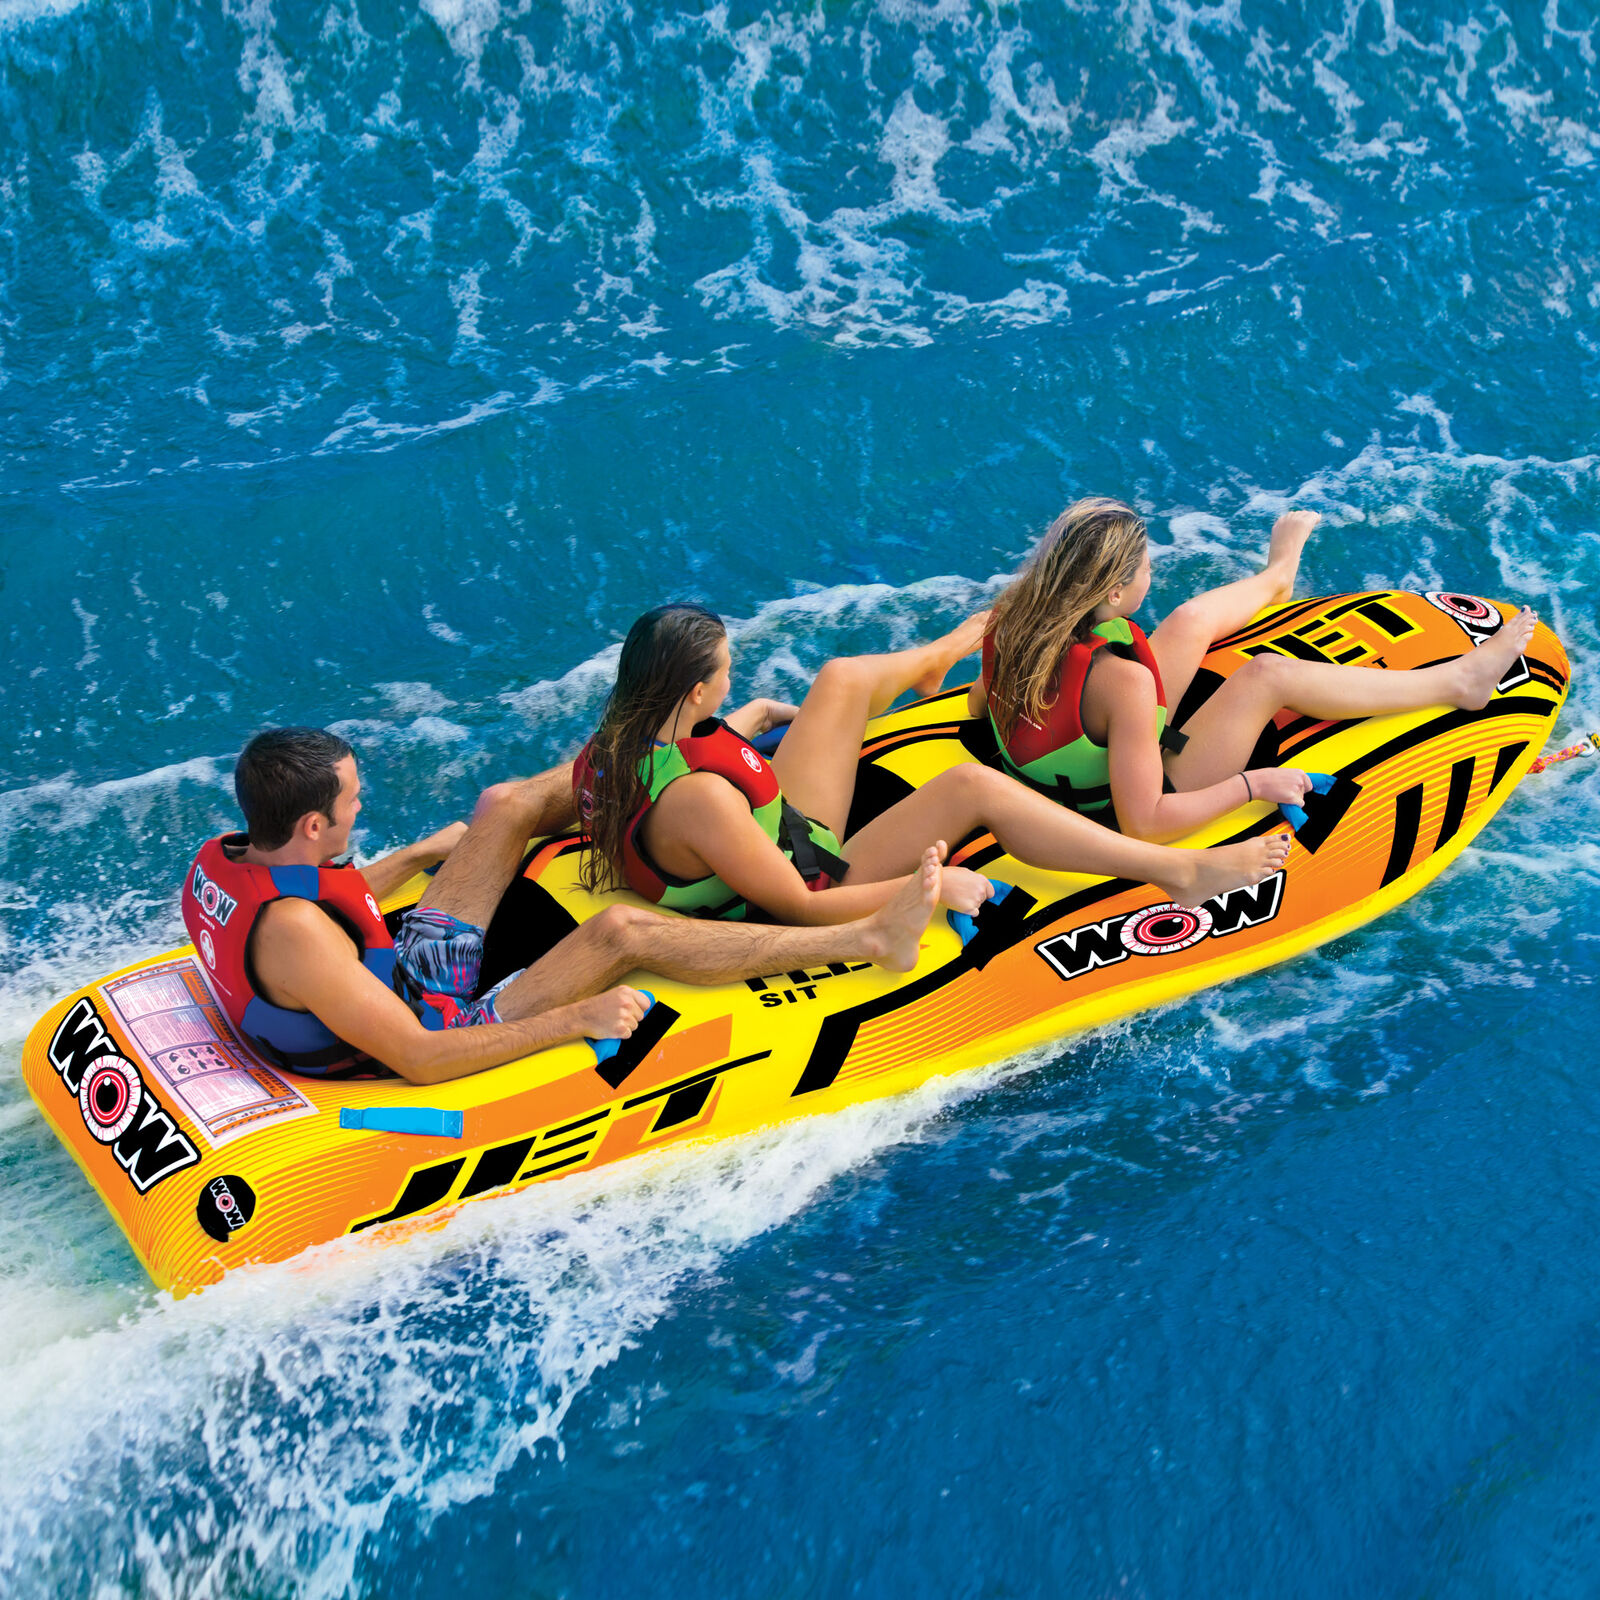 WOW Sports Jet Boat 3 Person Towable Water Tube For Pool and Lak